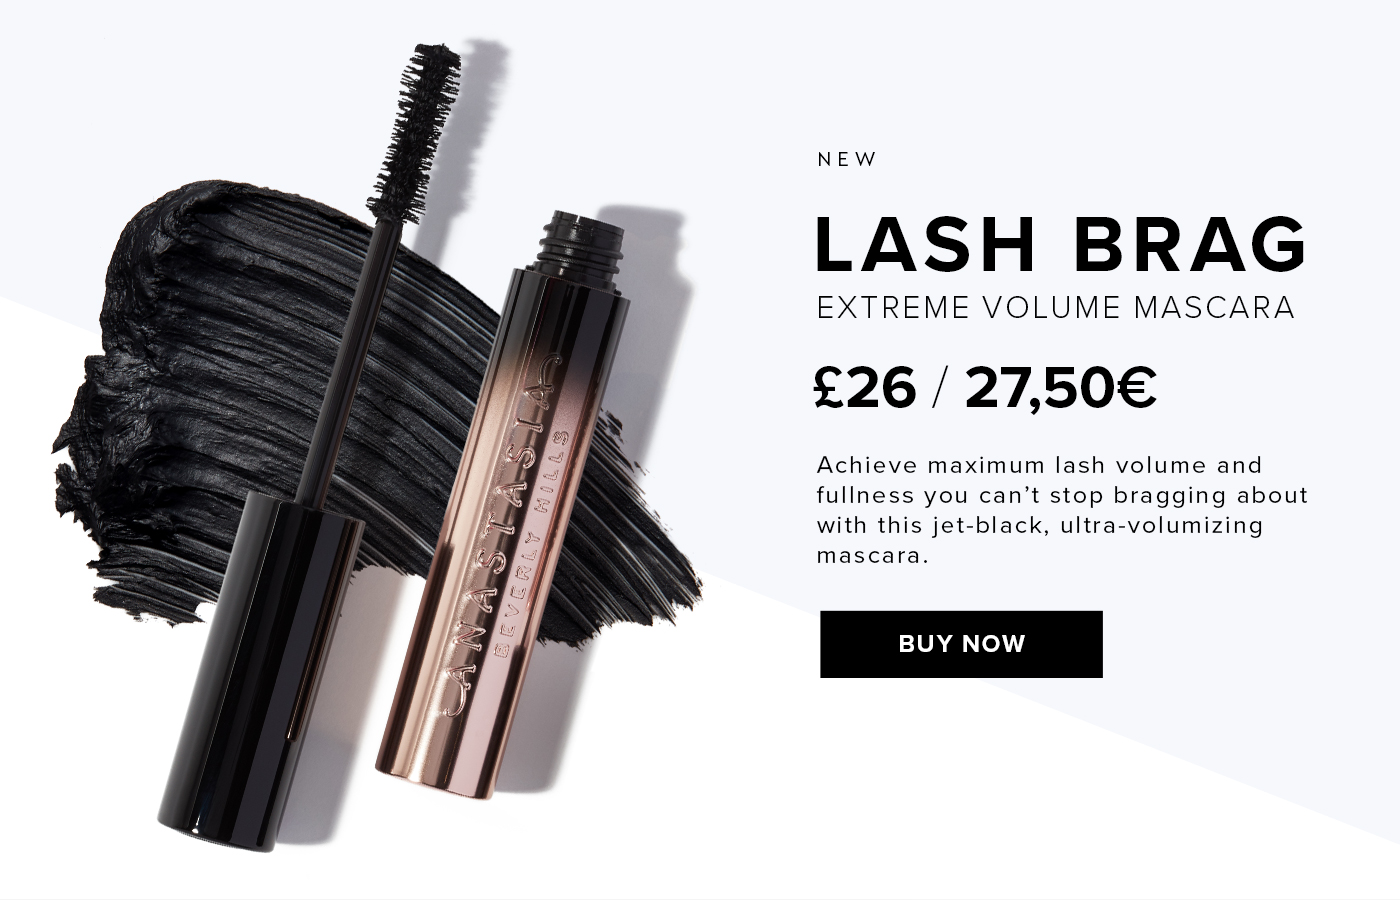 NEW LASH BRAG EXTREME VOLUME MASCARA. ?26 / 27,50?. Achieve maximum lash volume and fullness you can''t stop bragging about with this jet-black, ultra-volumizing mascara. BUY NOW.